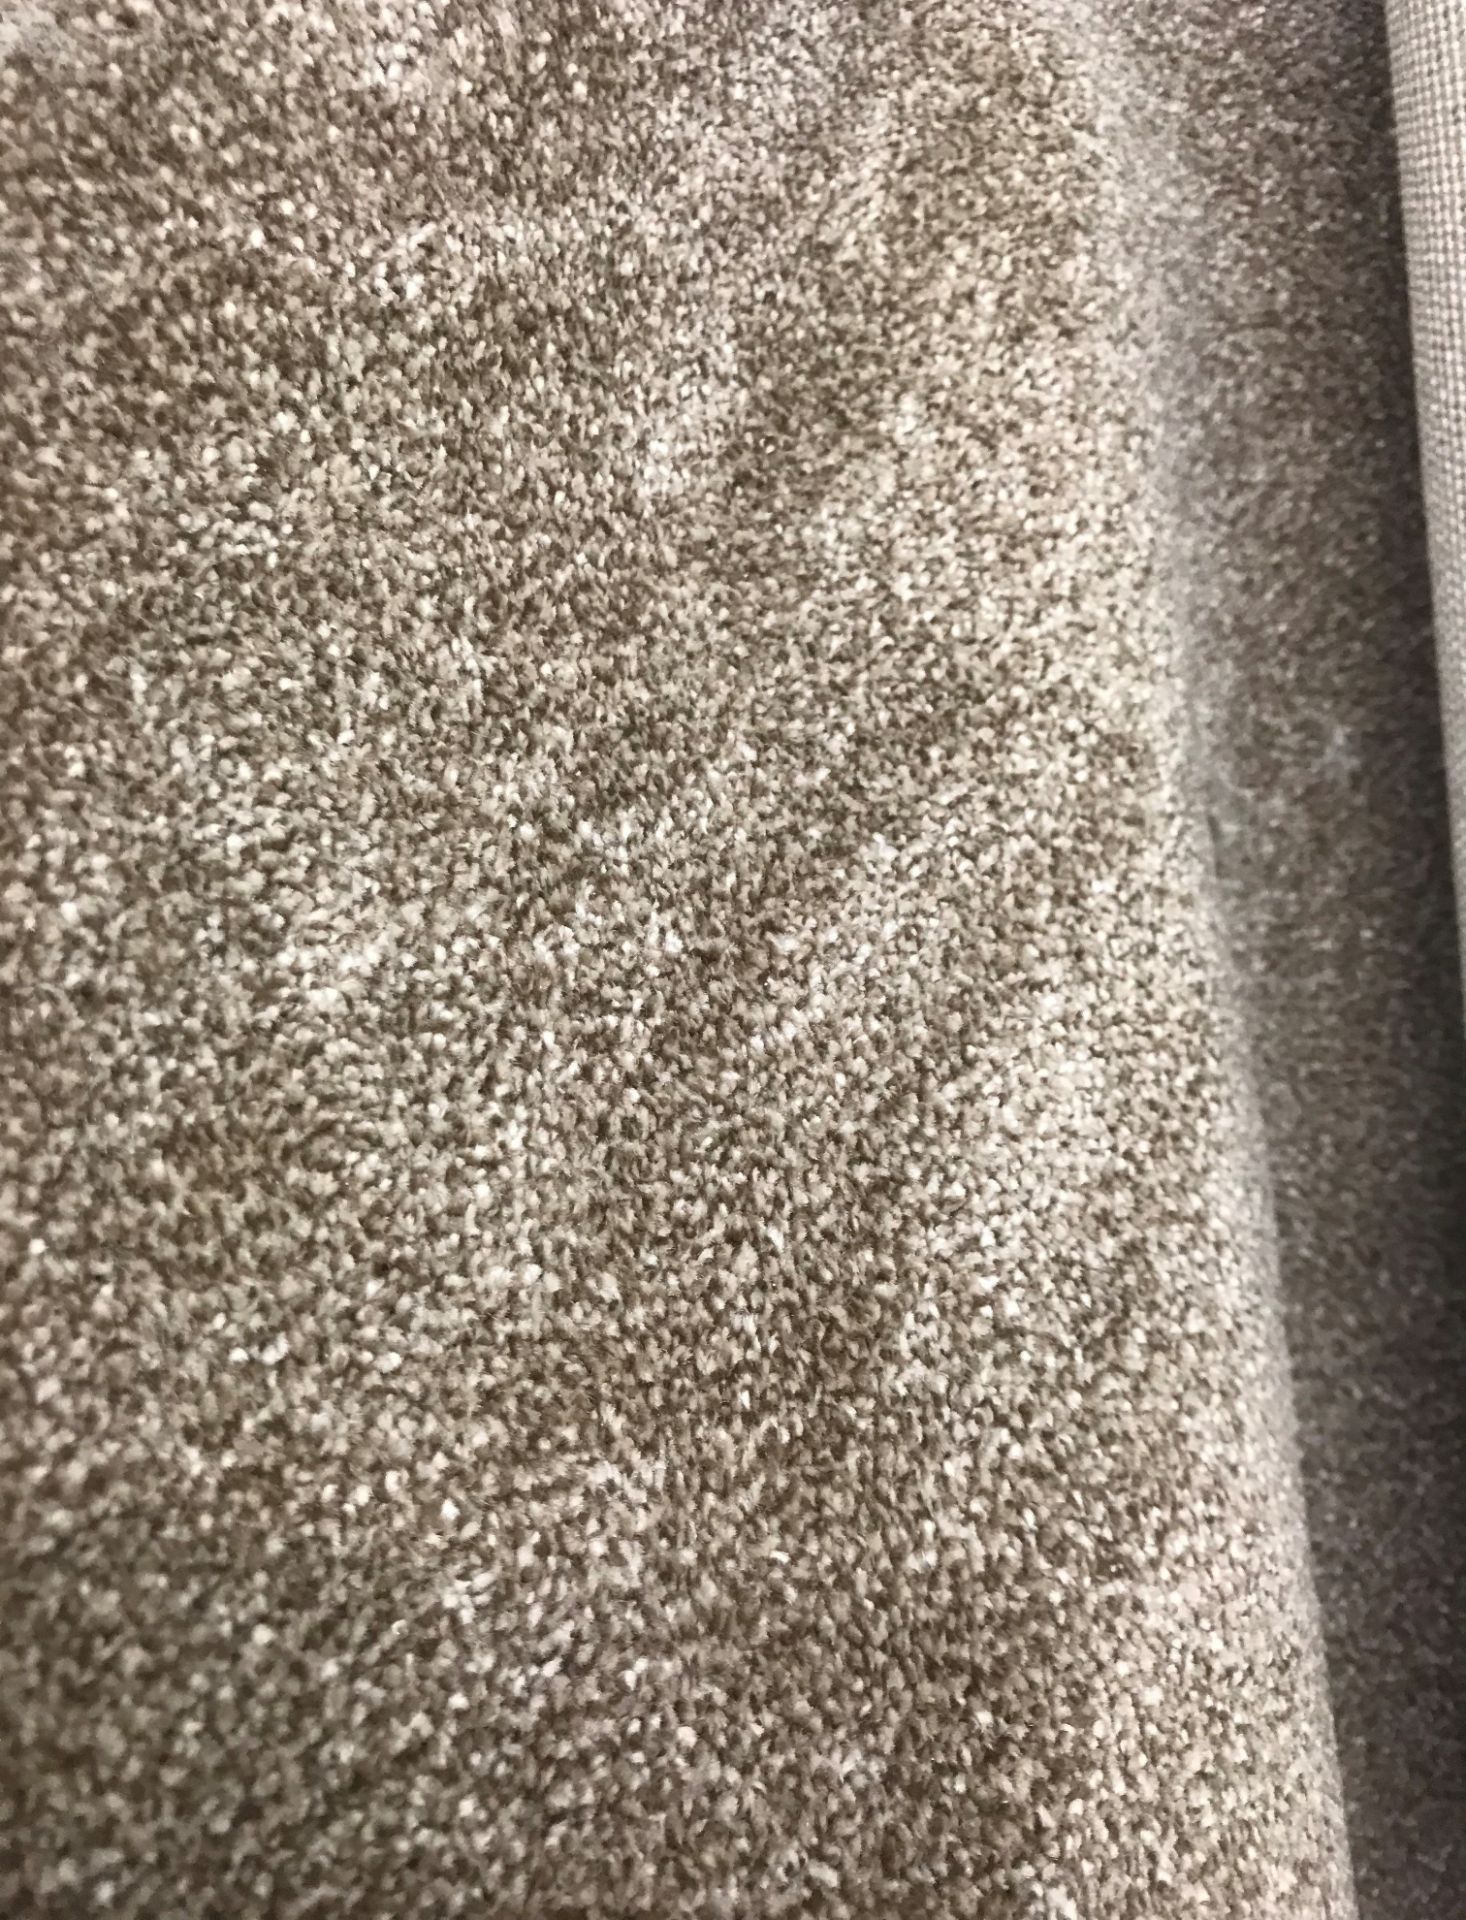 1 x Luxury Quality 50Oz Twist Pile Carpet - Colour Malted Barley - - 26X4 Meter Roll - Rrp £36.99 - Image 2 of 3